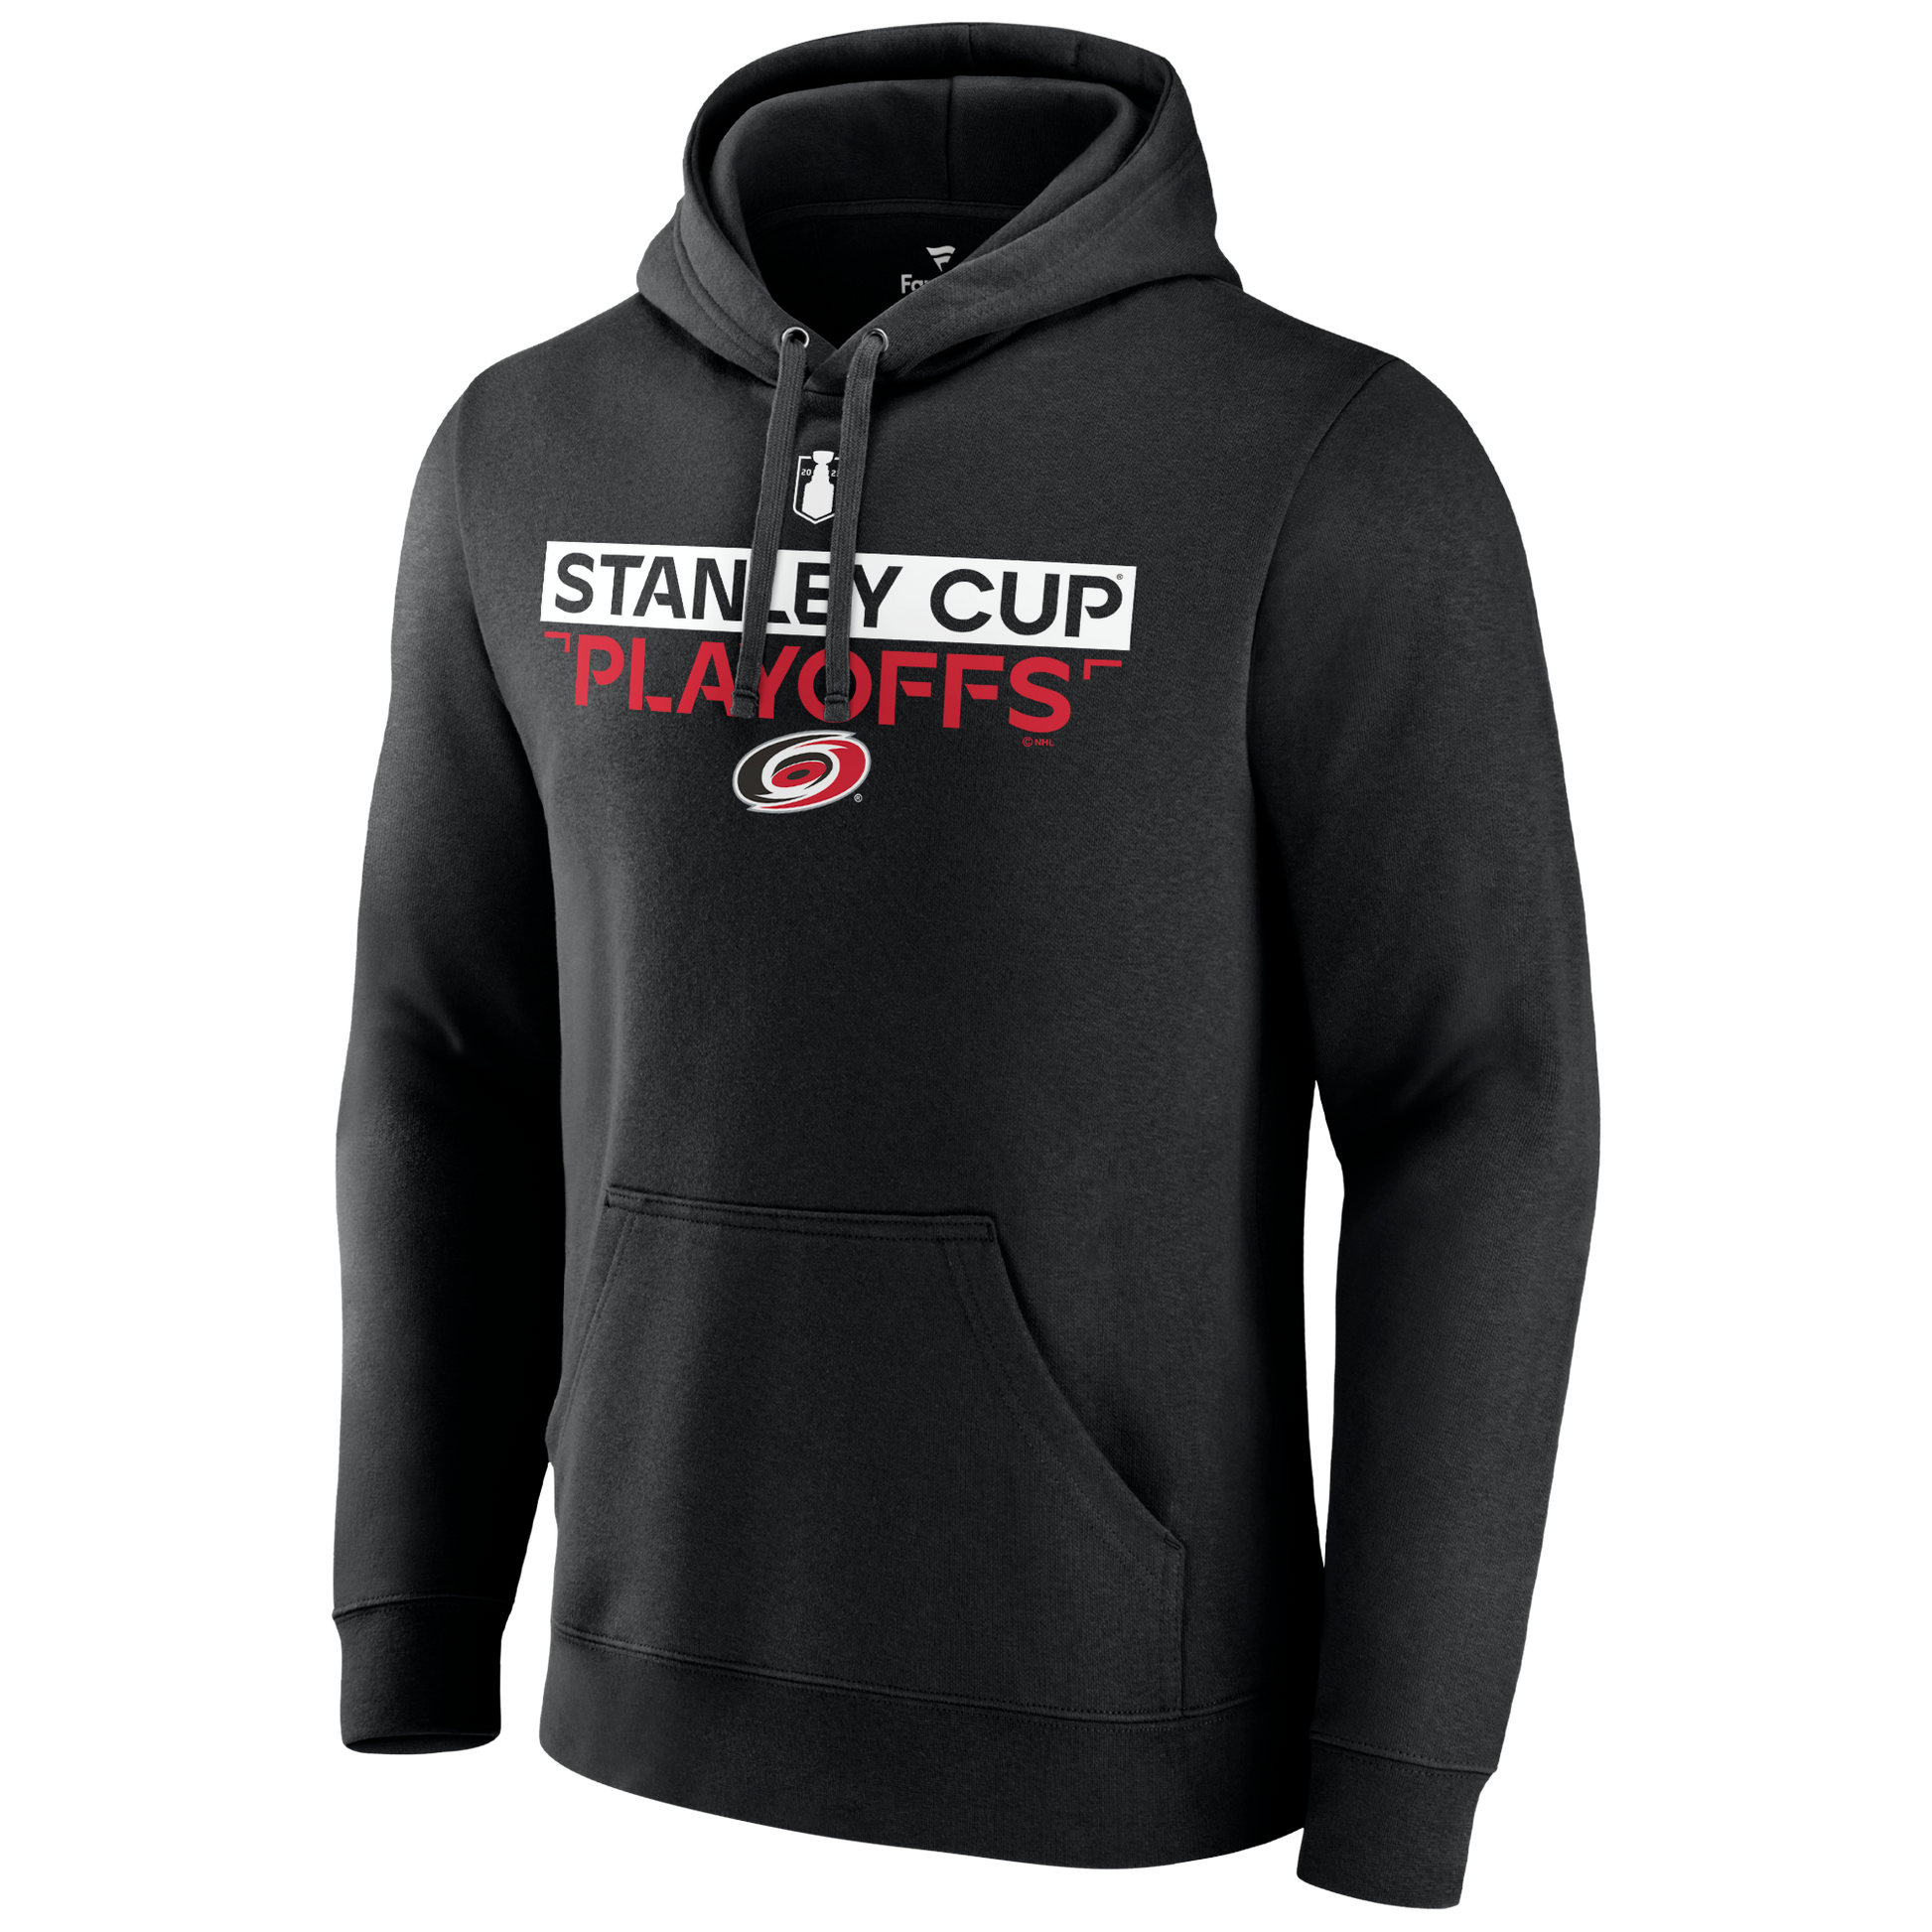 Black hoodie that says Stanley Cup Playoffs in Red white and black with Hurricanes logo 